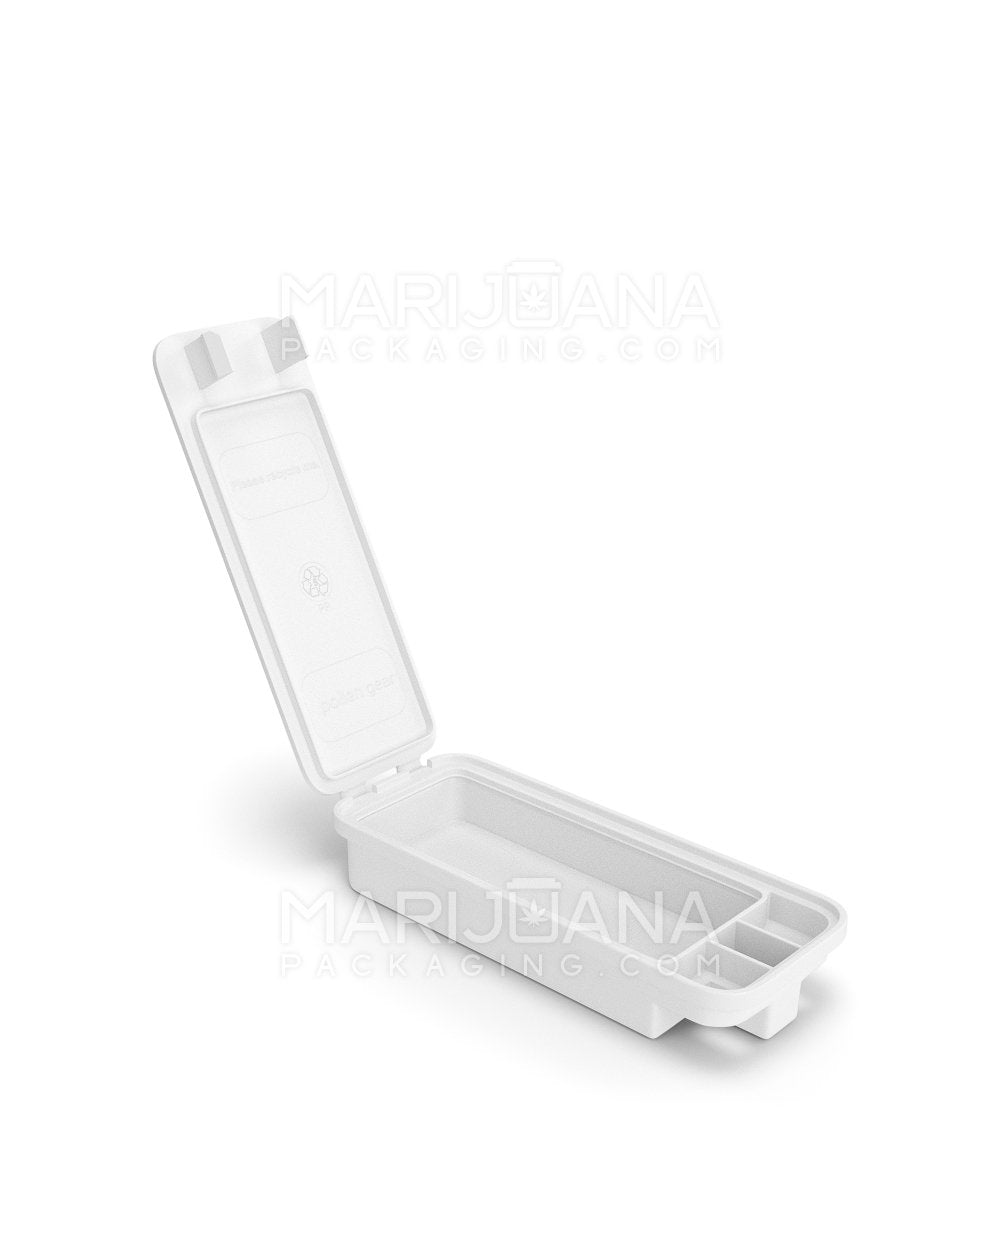 Child Resistant Snap Box Edible & Pre-Roll Joint Case | Small - White Plastic | Sample - 1